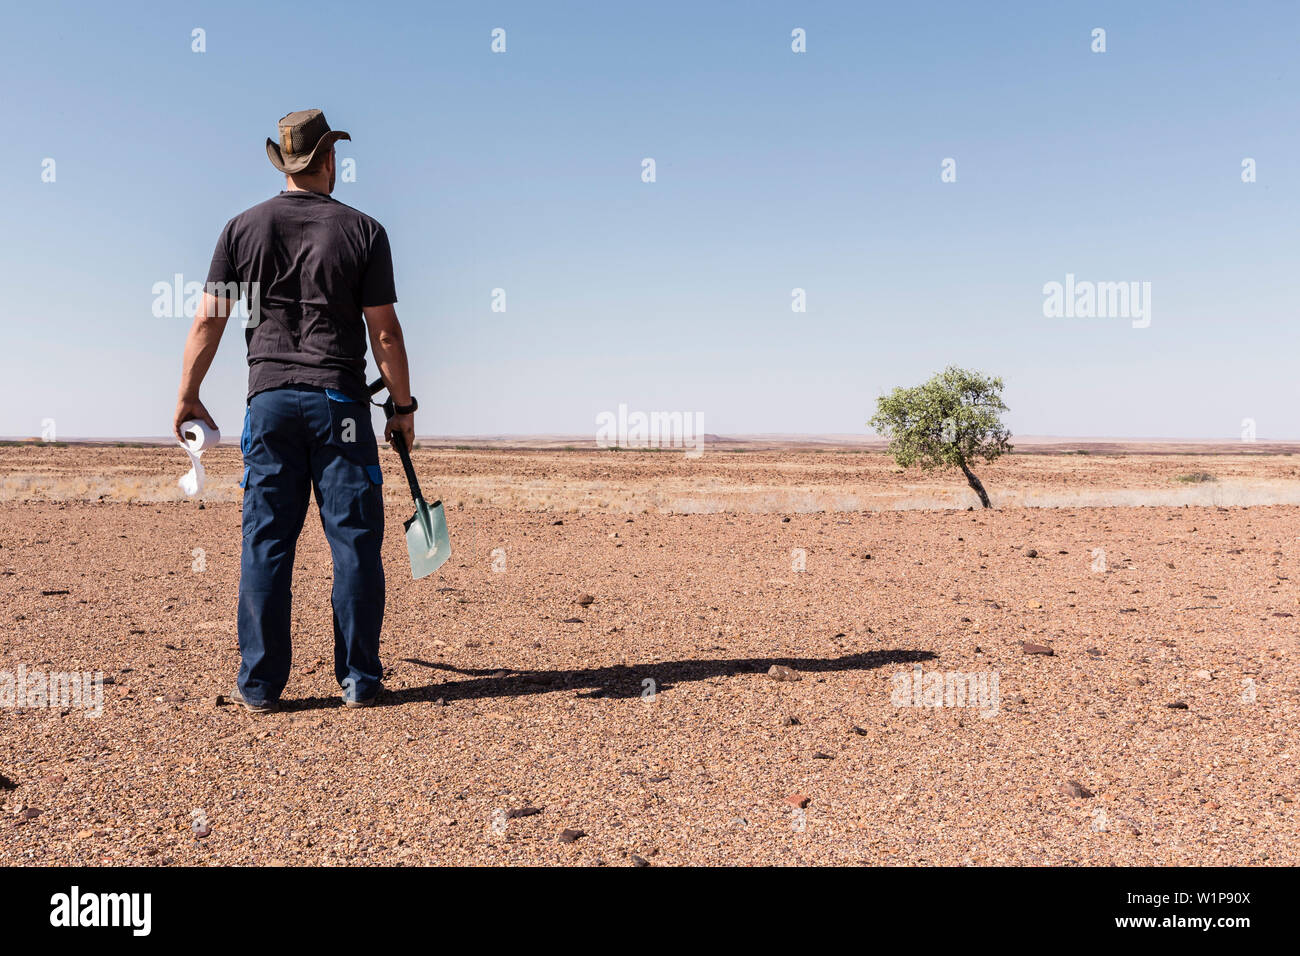 A man reflecting upon his toilet options. What's not buried carefully, will be dug out by wild animals, and due to the dry climate, things decompose e Stock Photo